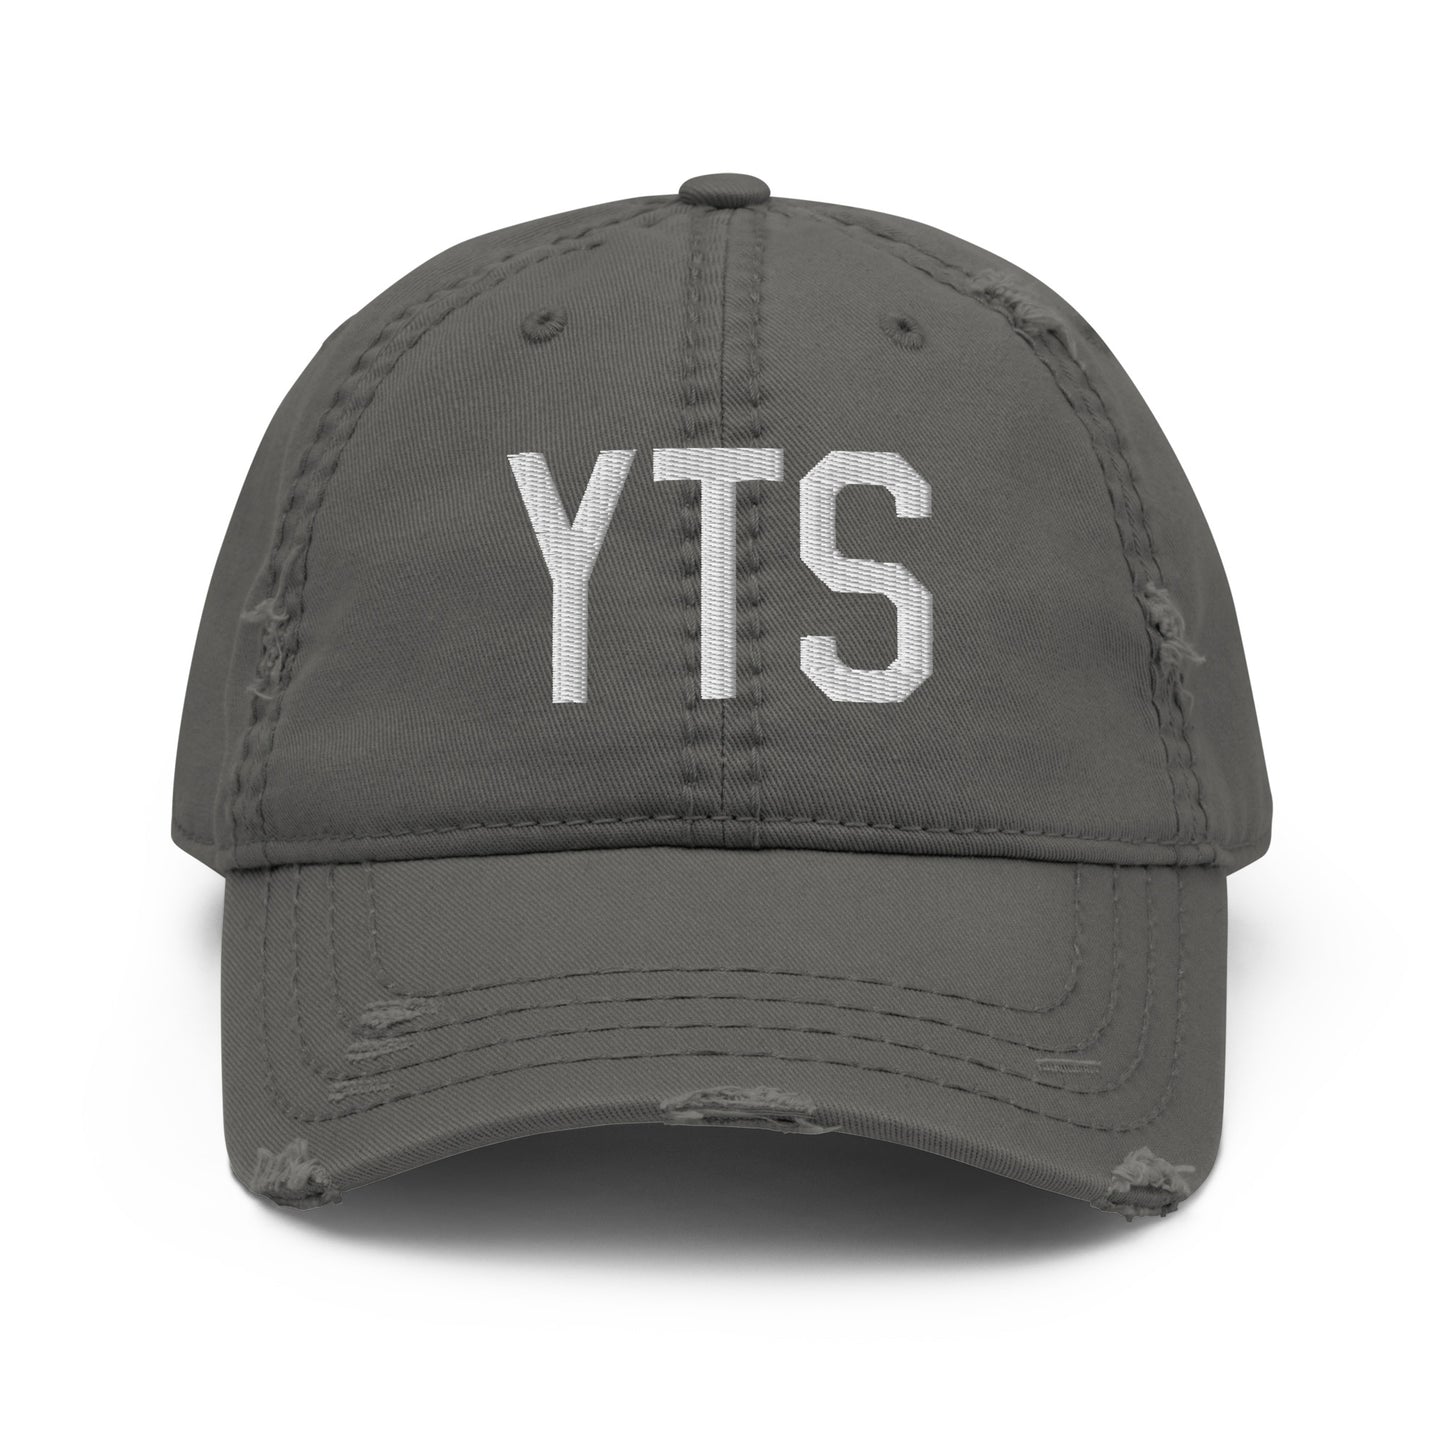 Airport Code Distressed Hat - White • YTS Timmins • YHM Designs - Image 15